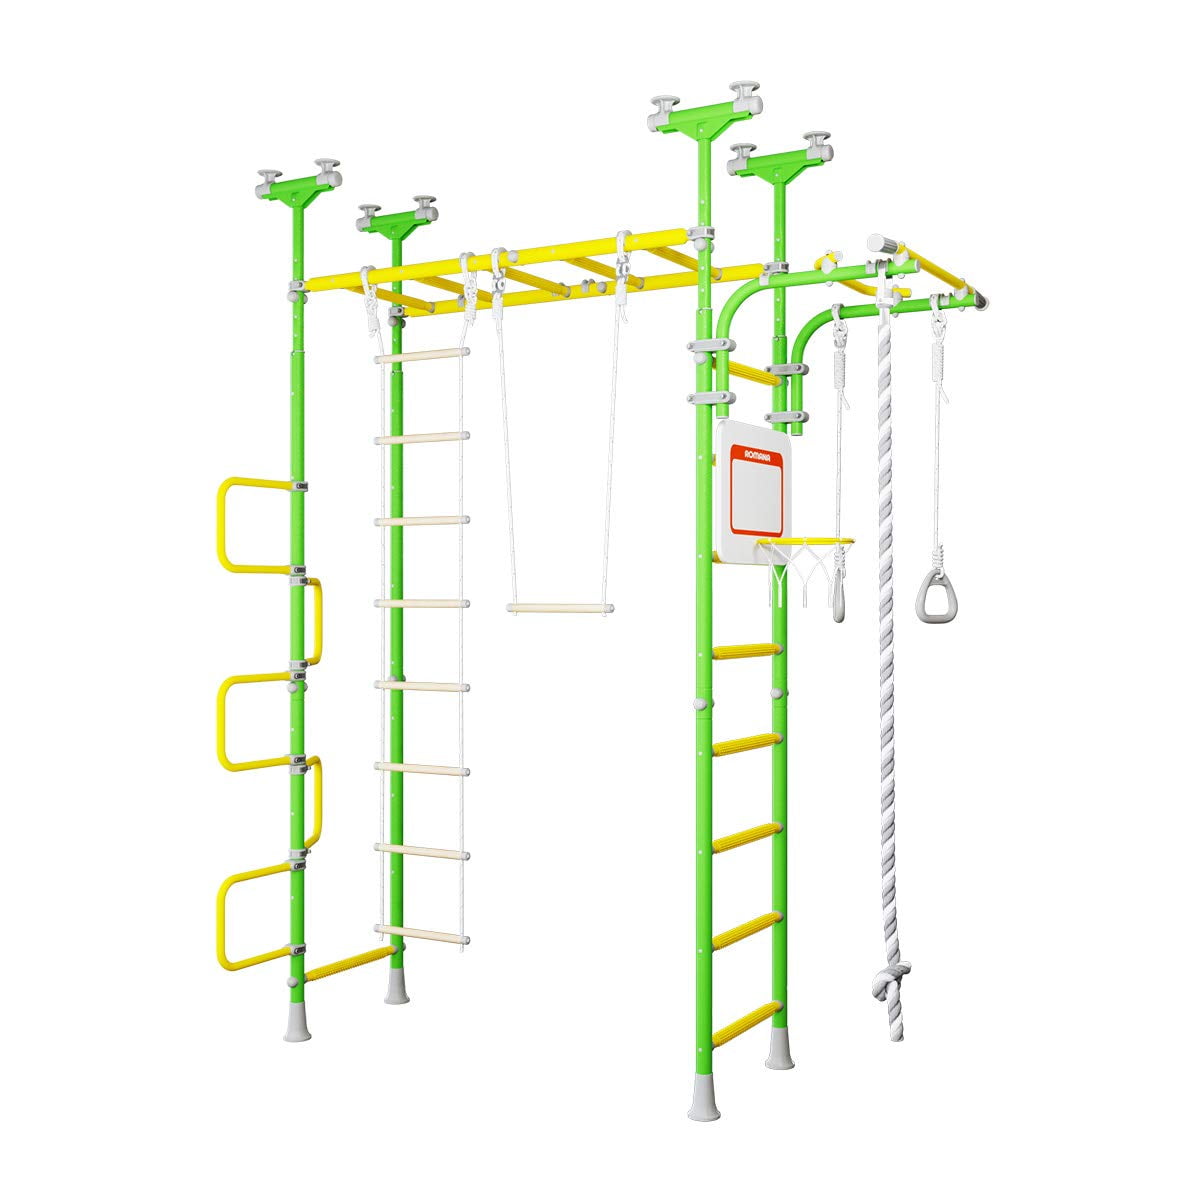 Details about   Sport Wall Bars Swedish Ladder Gymnastic Climbing Home Kids Playground Gym 220cm 